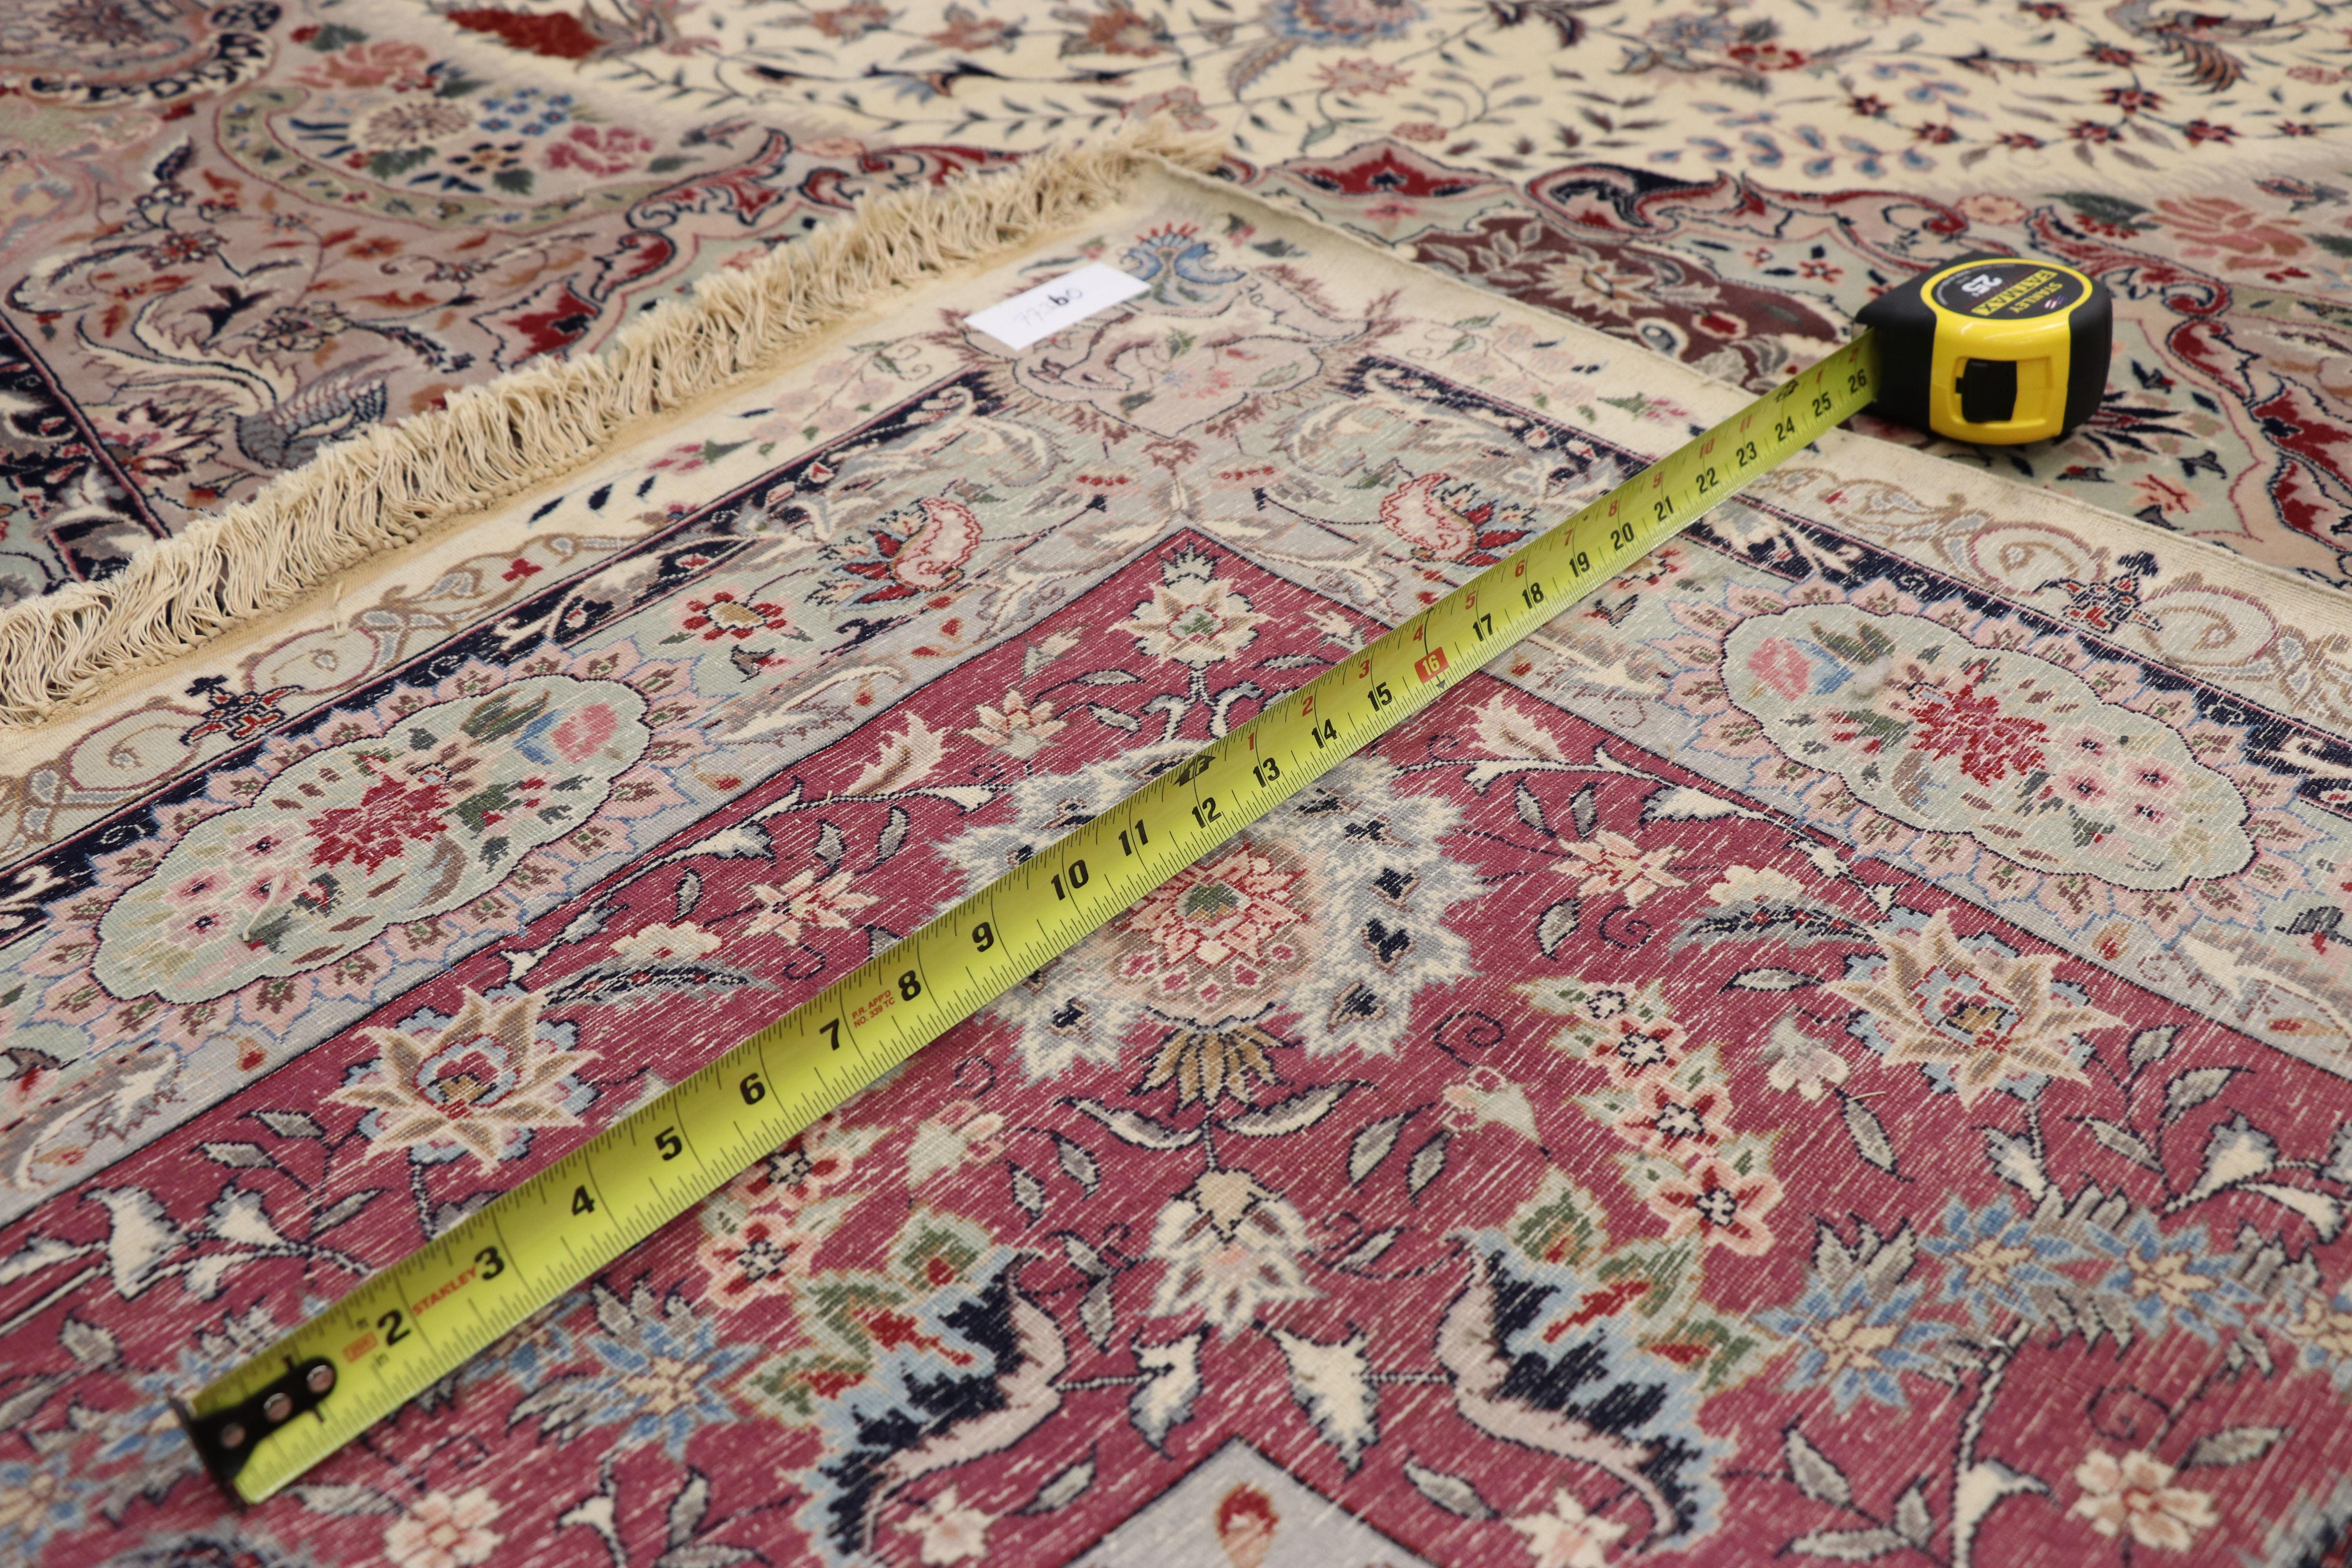 Hand-Knotted Oversized Antique Persian Tabriz Rug, Bridgerton Style Meets Rococo For Sale